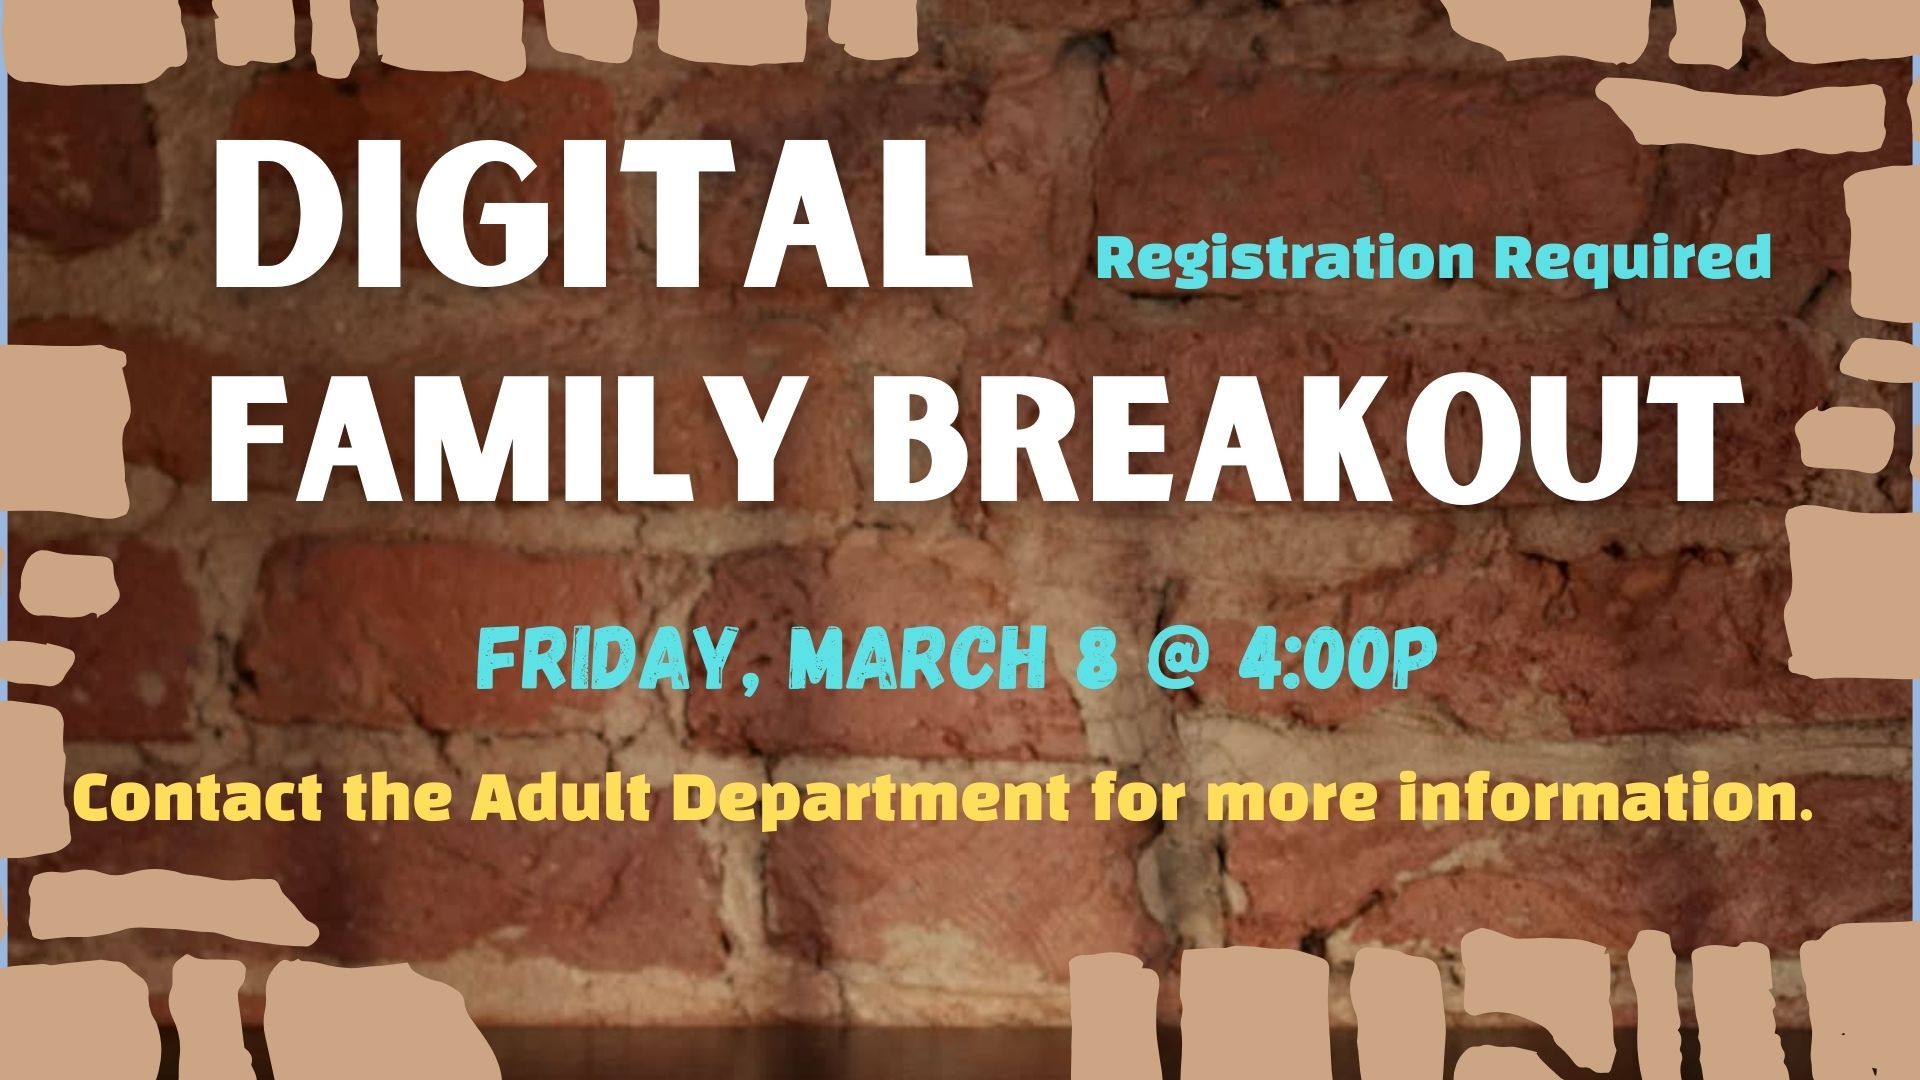 Image of a brown brick wall with broken blocks all around.  Text reads "Digital Family Breakout.  Registration required.  Friday, March 8 @ 4:00p.  Contact the Adult Department for more information. 